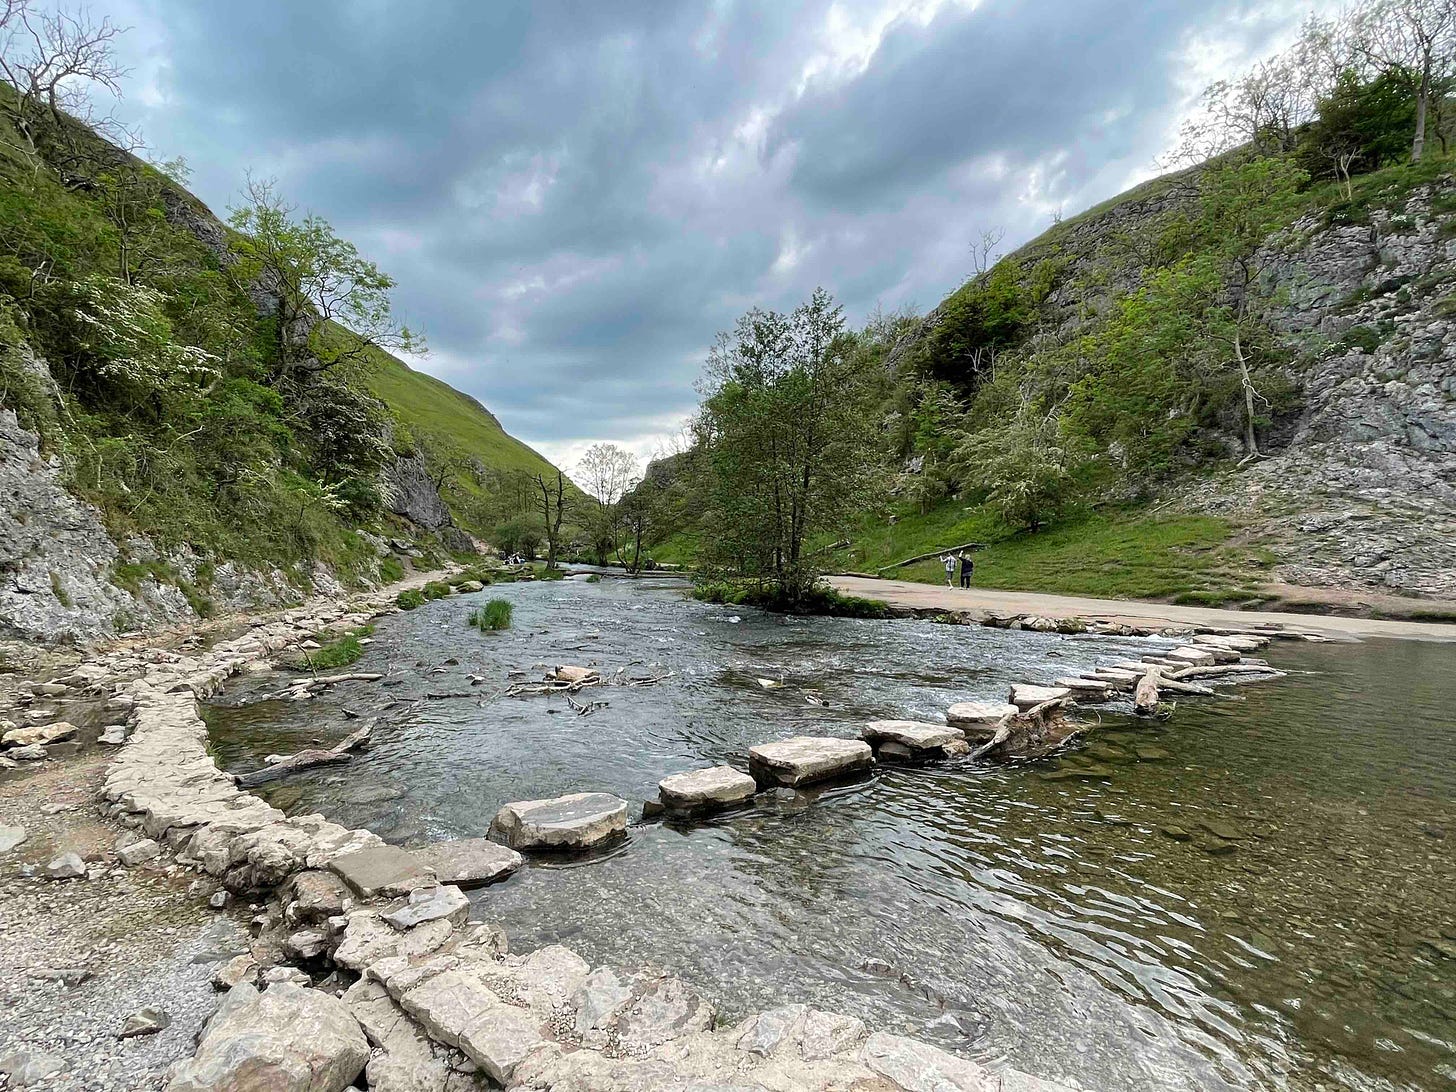 Colour photograph of the stepping stones across the River Dove in the Dovedale Valley, Peak District, UK